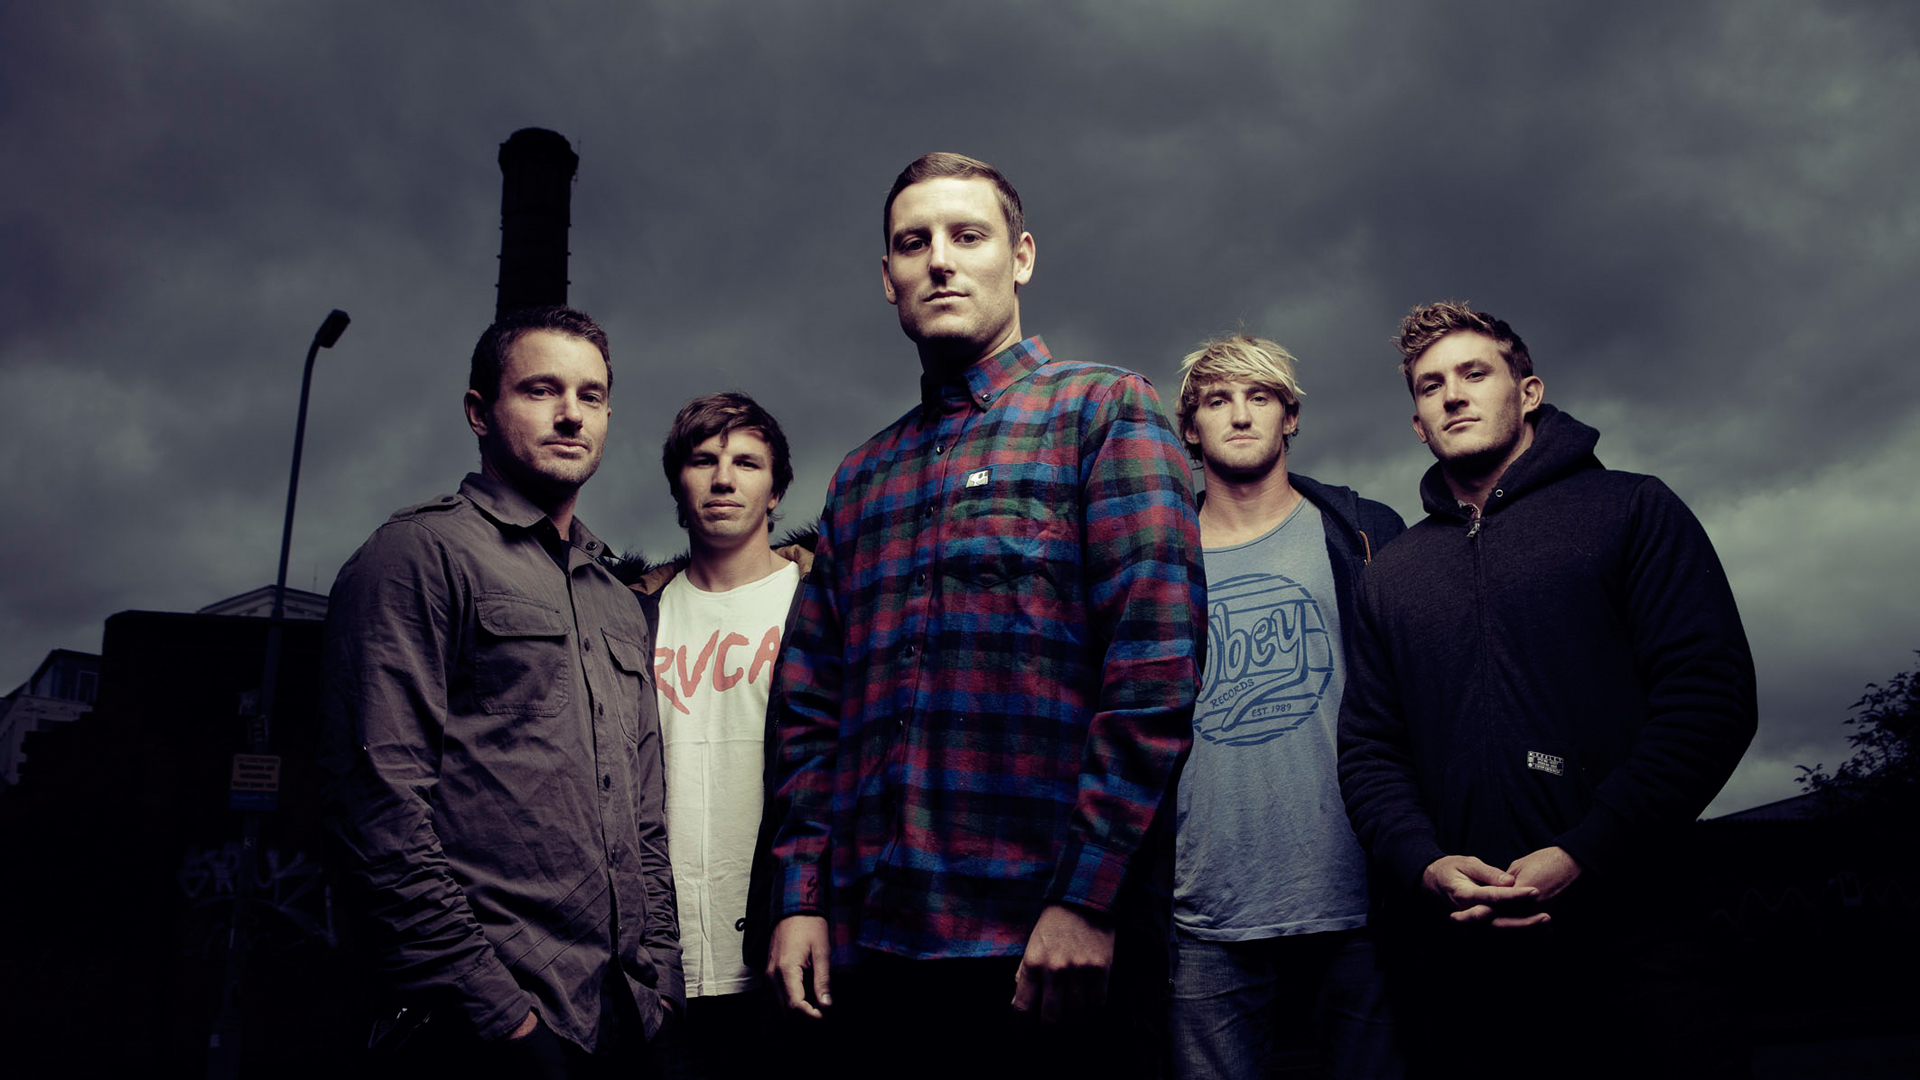 Home Is For The Heartless av Parkway Drive